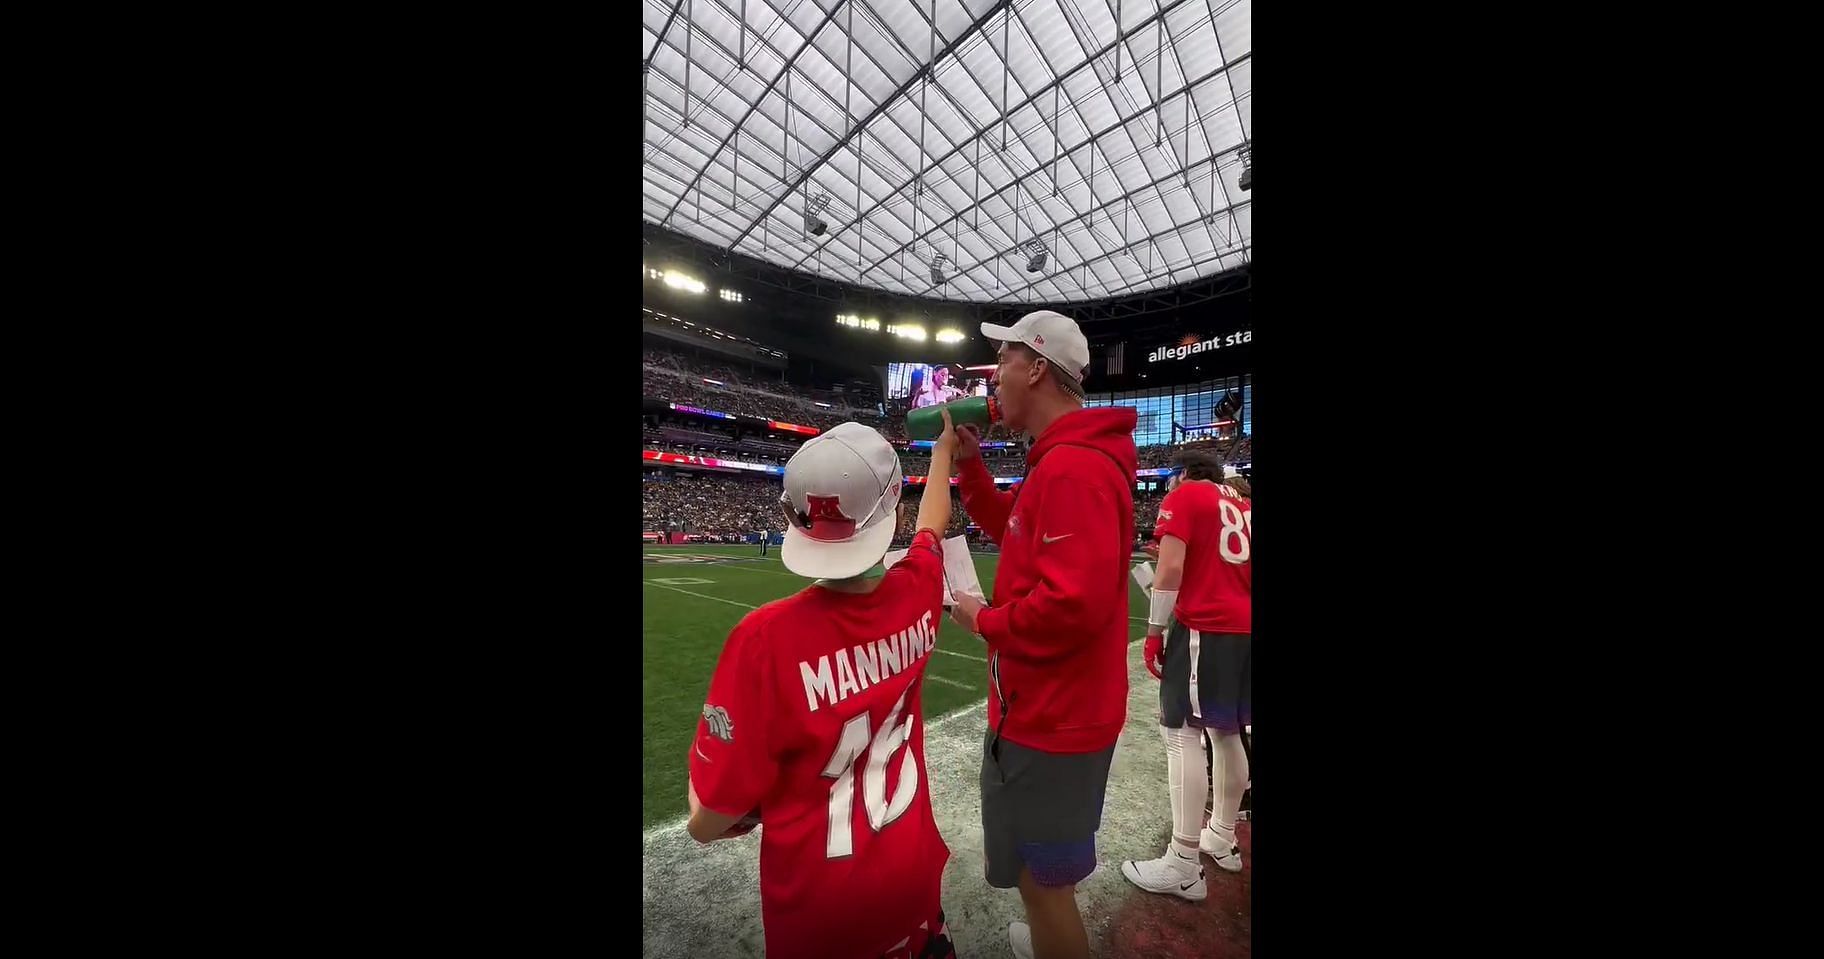 Peyton Manning being given a drink by his son during the Pro Bowl | Image: NFL on Twitter